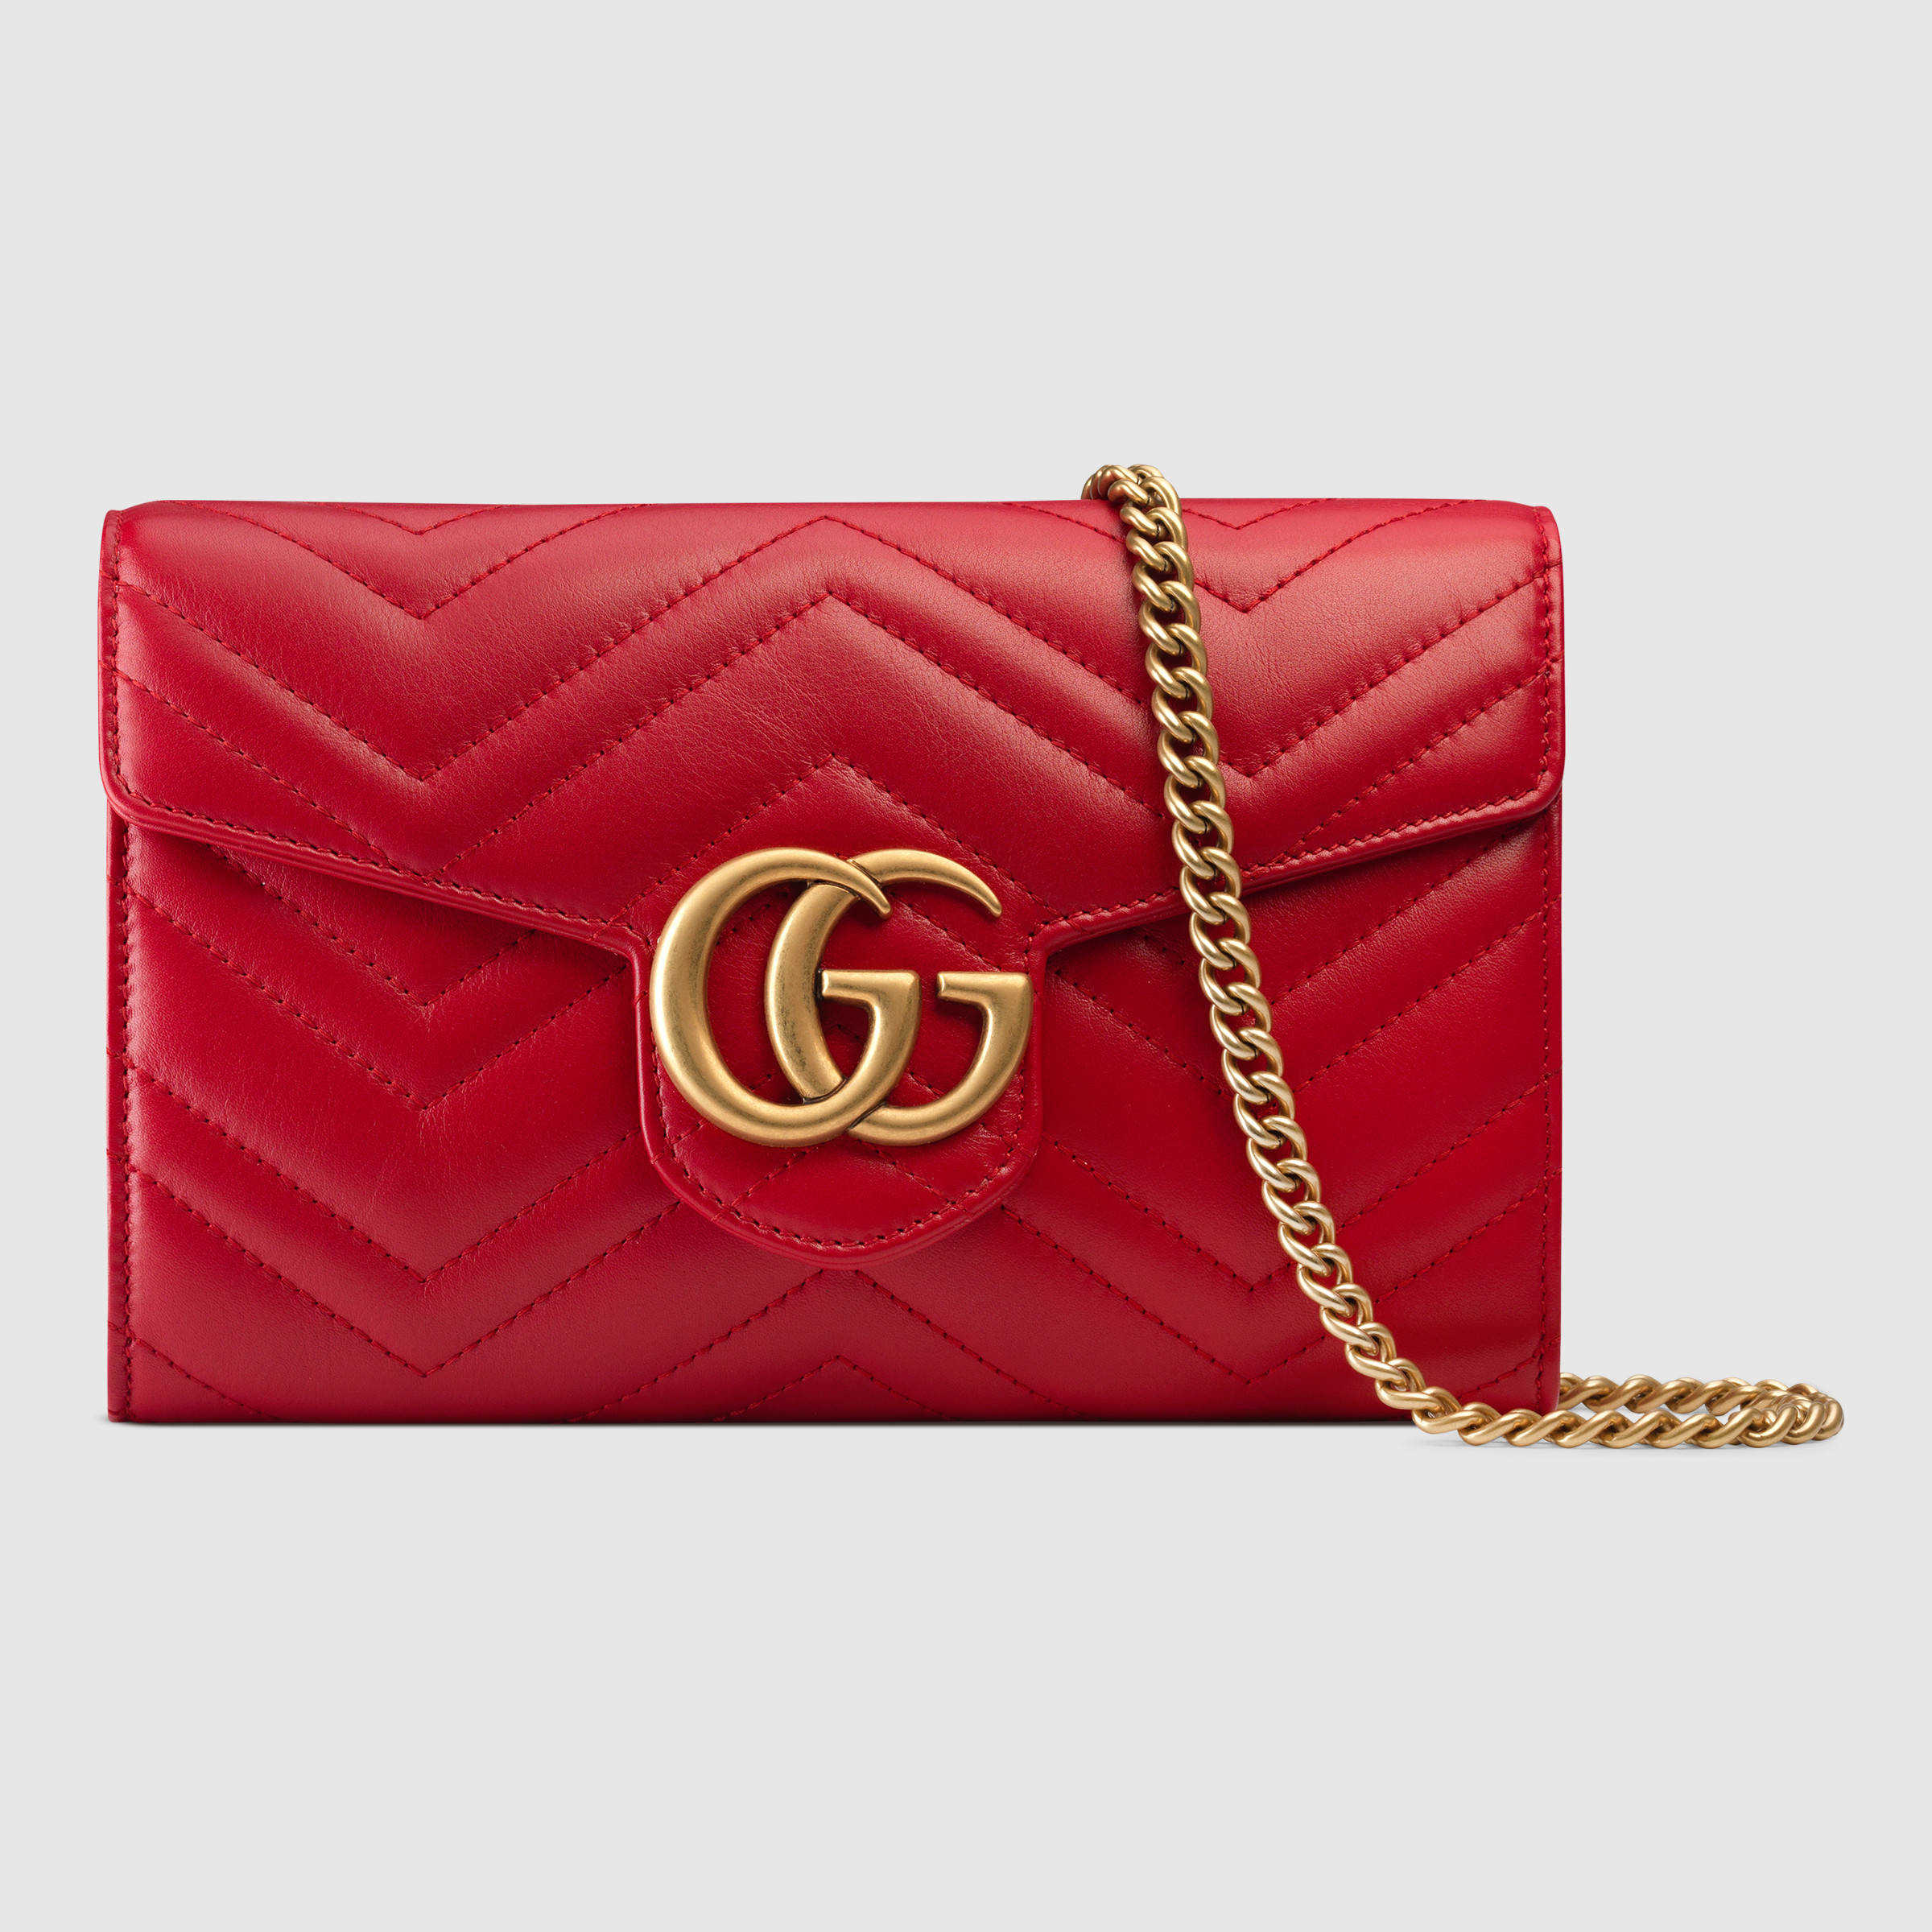 Lyst - Gucci GG Marmont Matelassé Leather Mini Shoulder Bag in Red